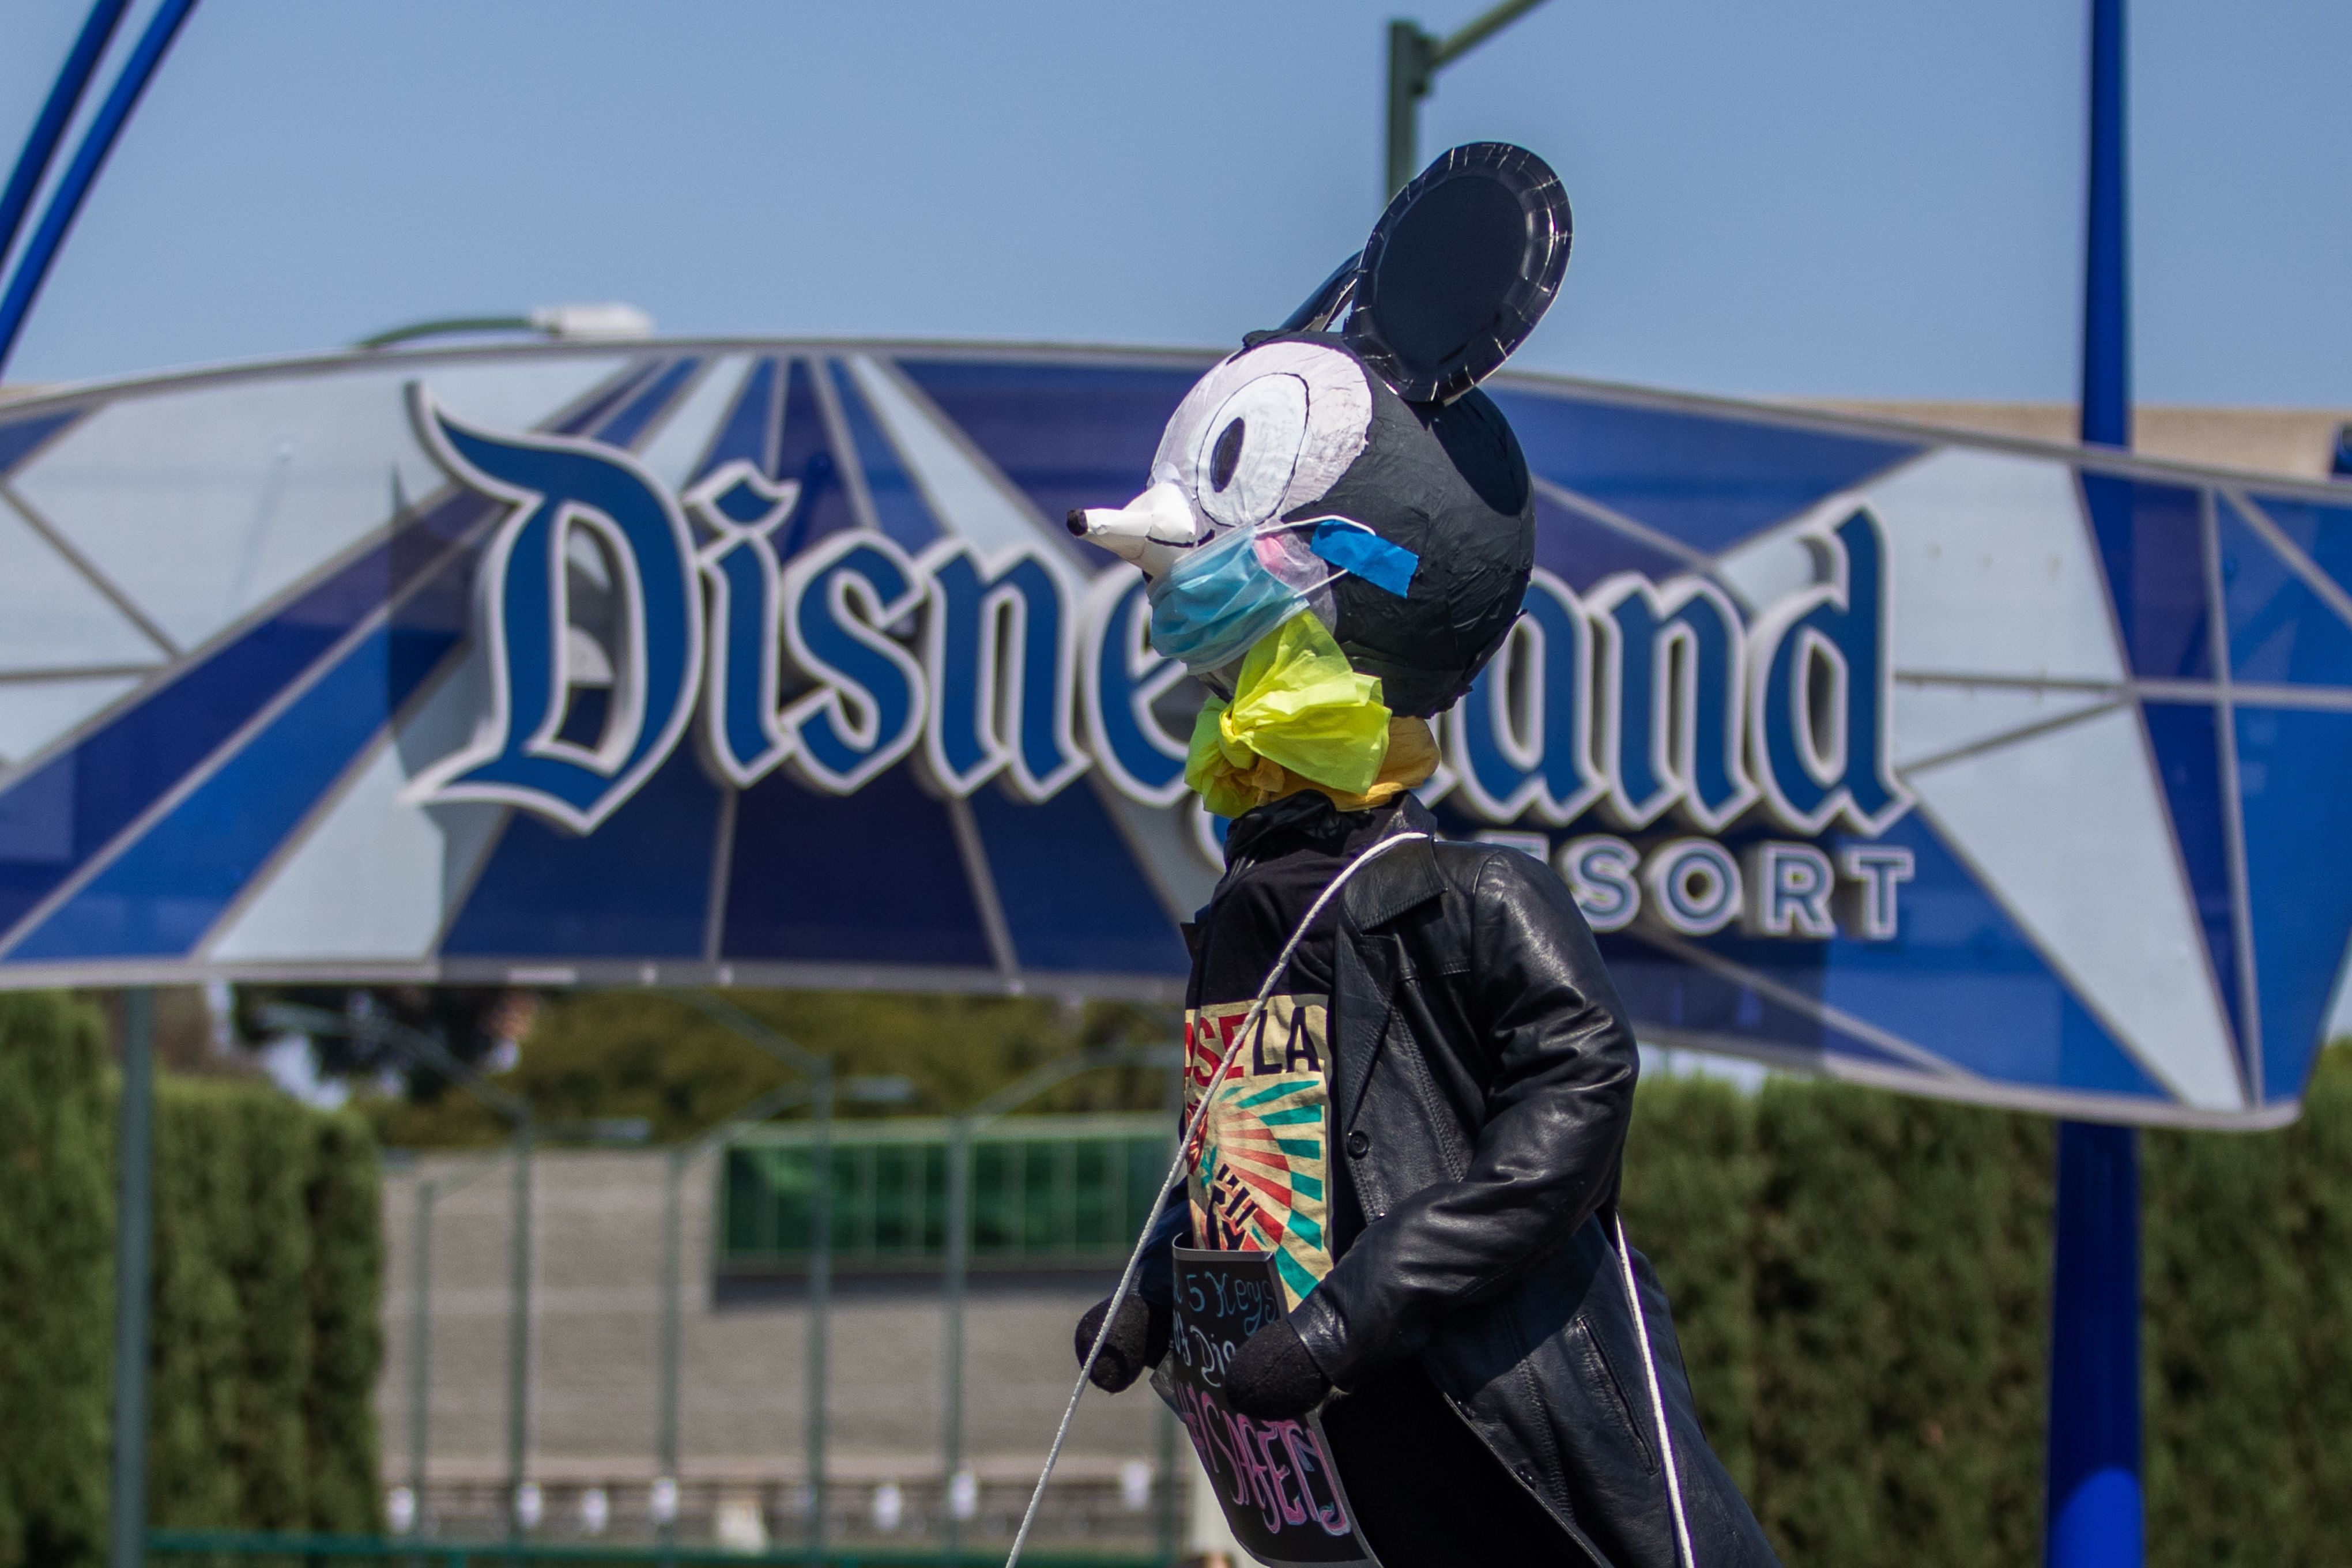 A pair of Disneyland unions are calling upon more than 17,000 cast members to protest the proposed July 17 reopening of Disney’s Anaheim theme parks out of concern for employee safety. (Photo by AFP)